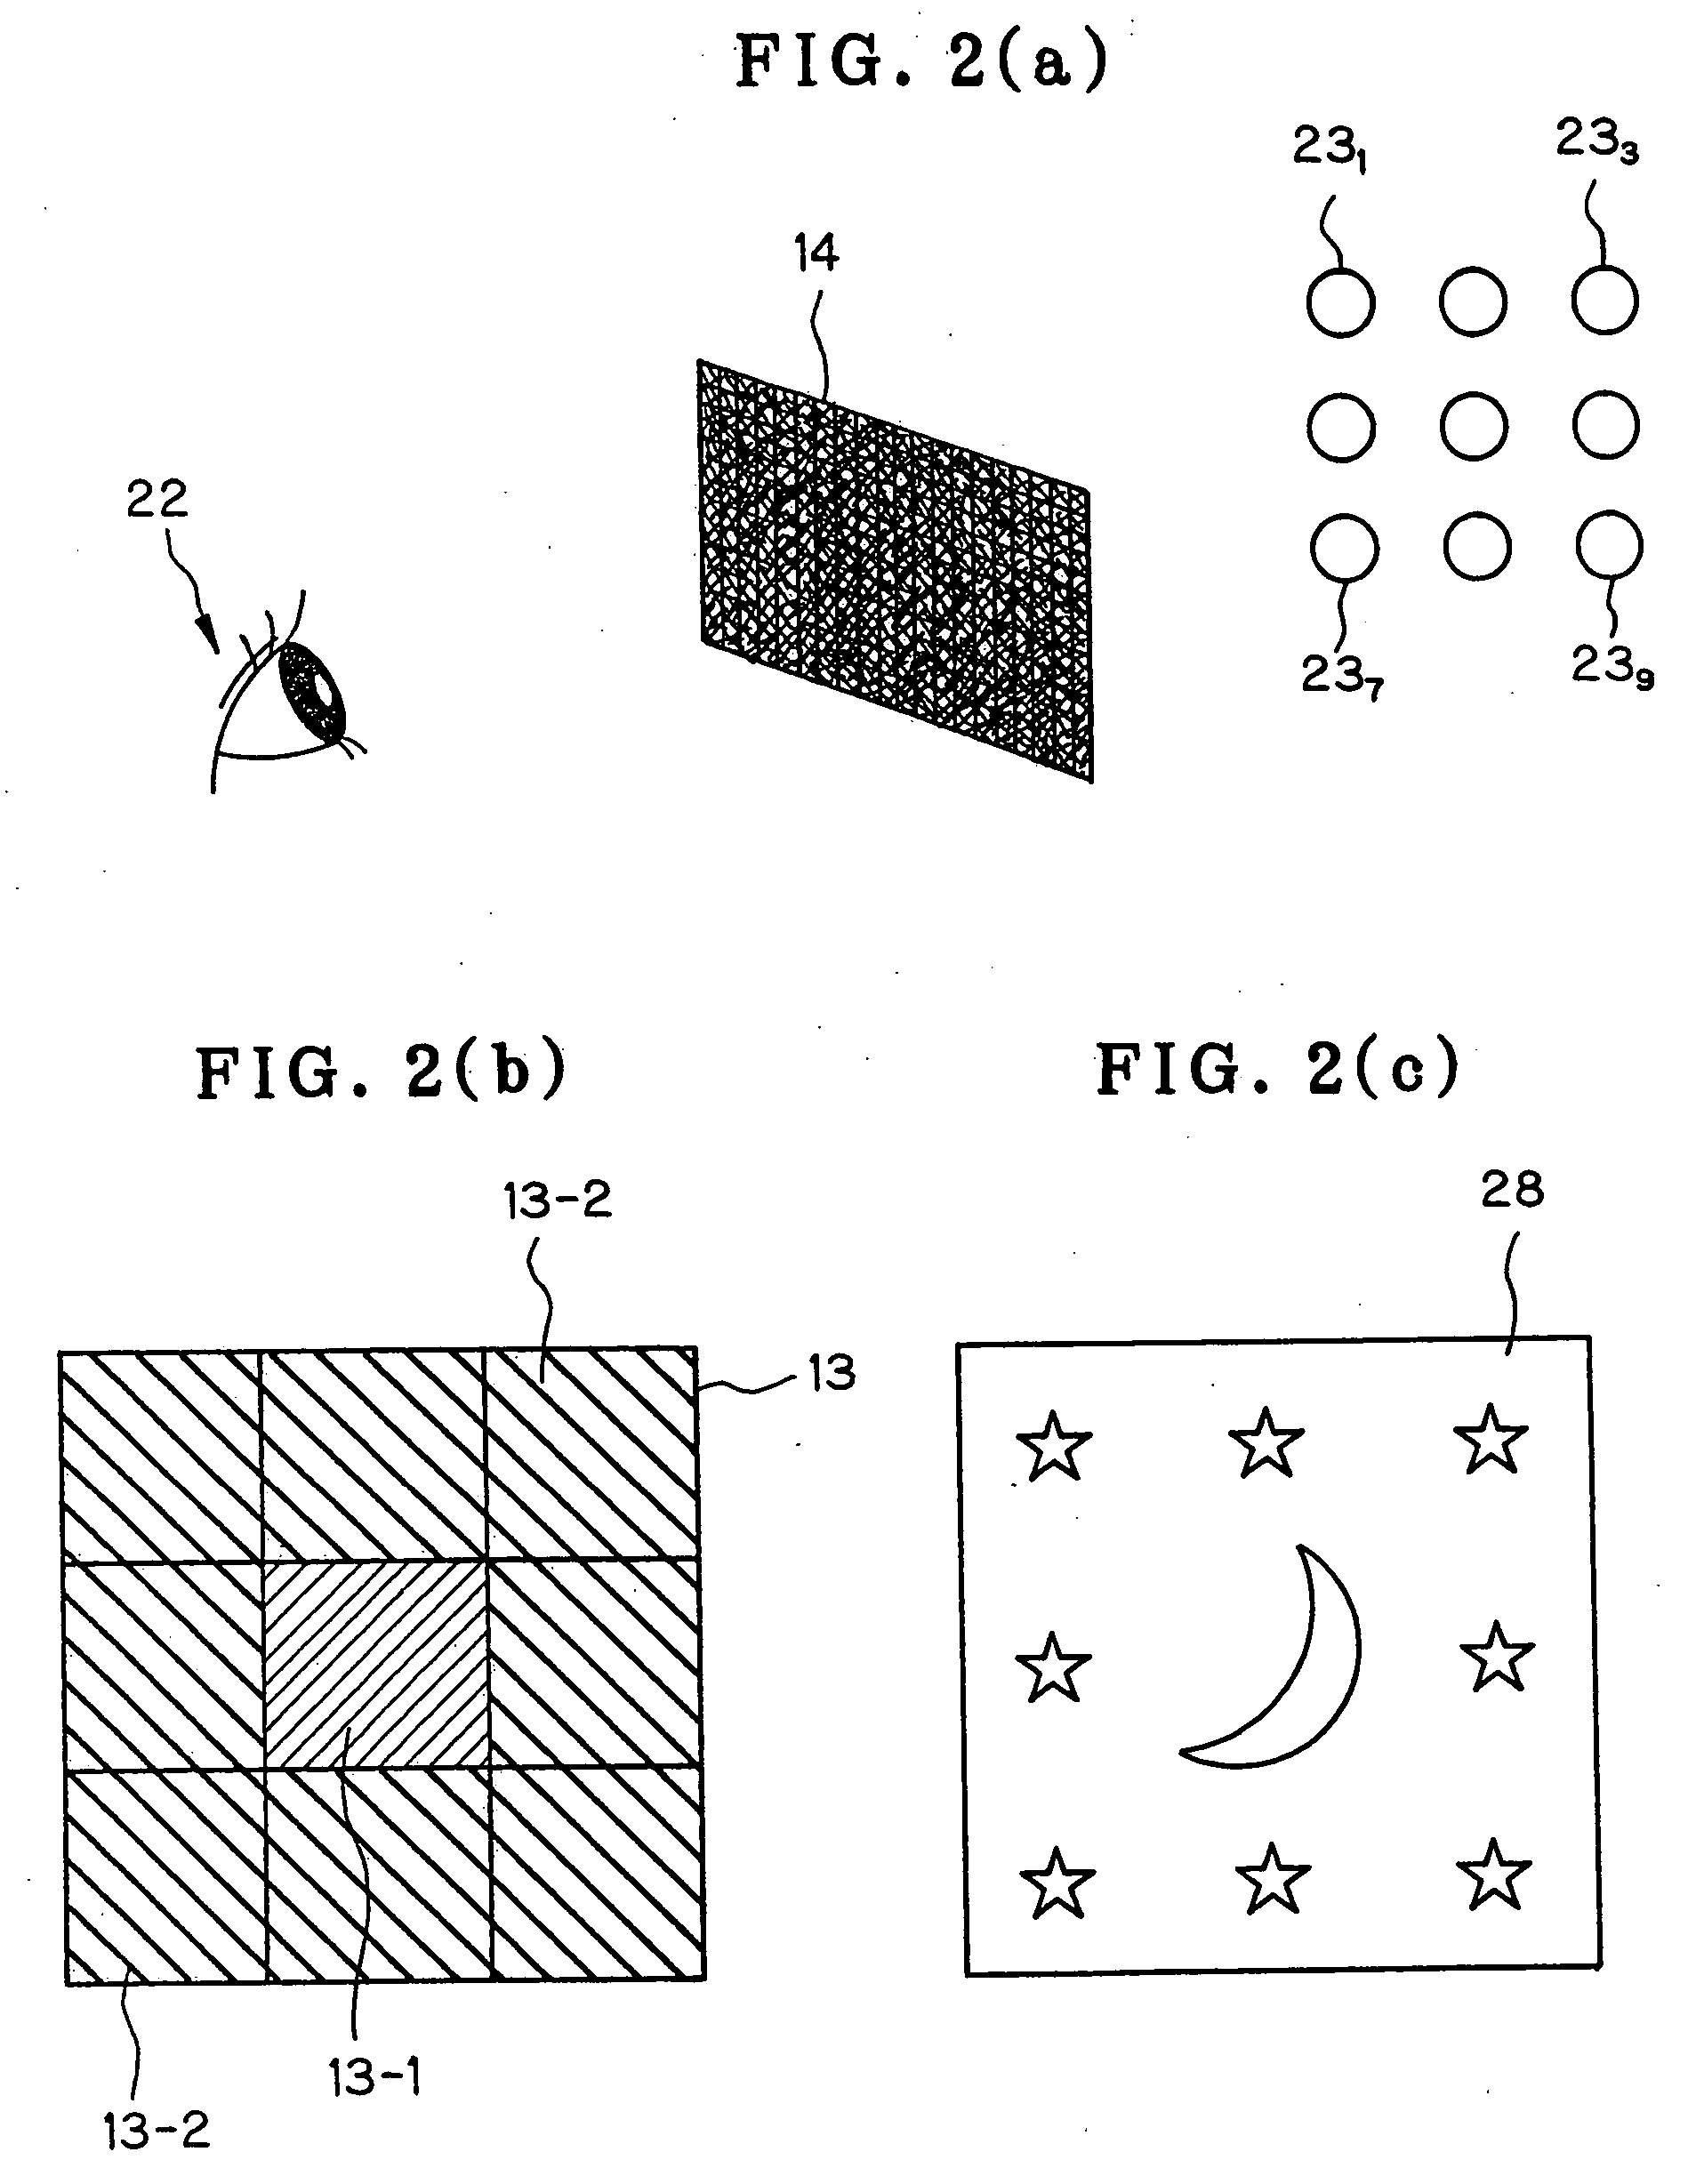 Hologram and holographic viewing device incorporating it